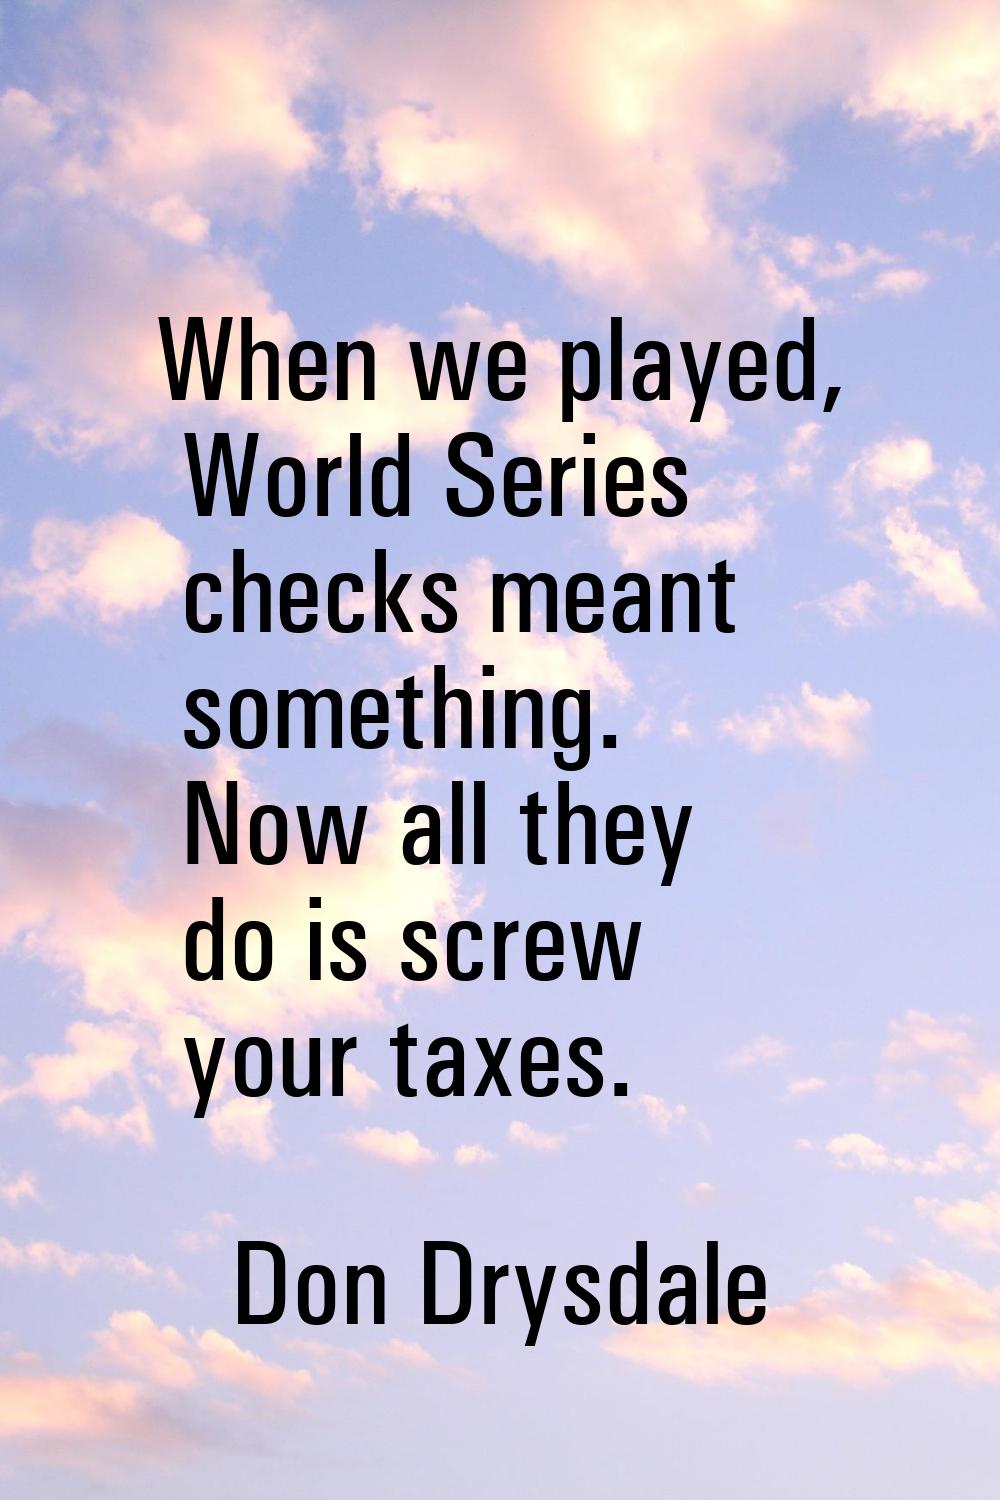 When we played, World Series checks meant something. Now all they do is screw your taxes.